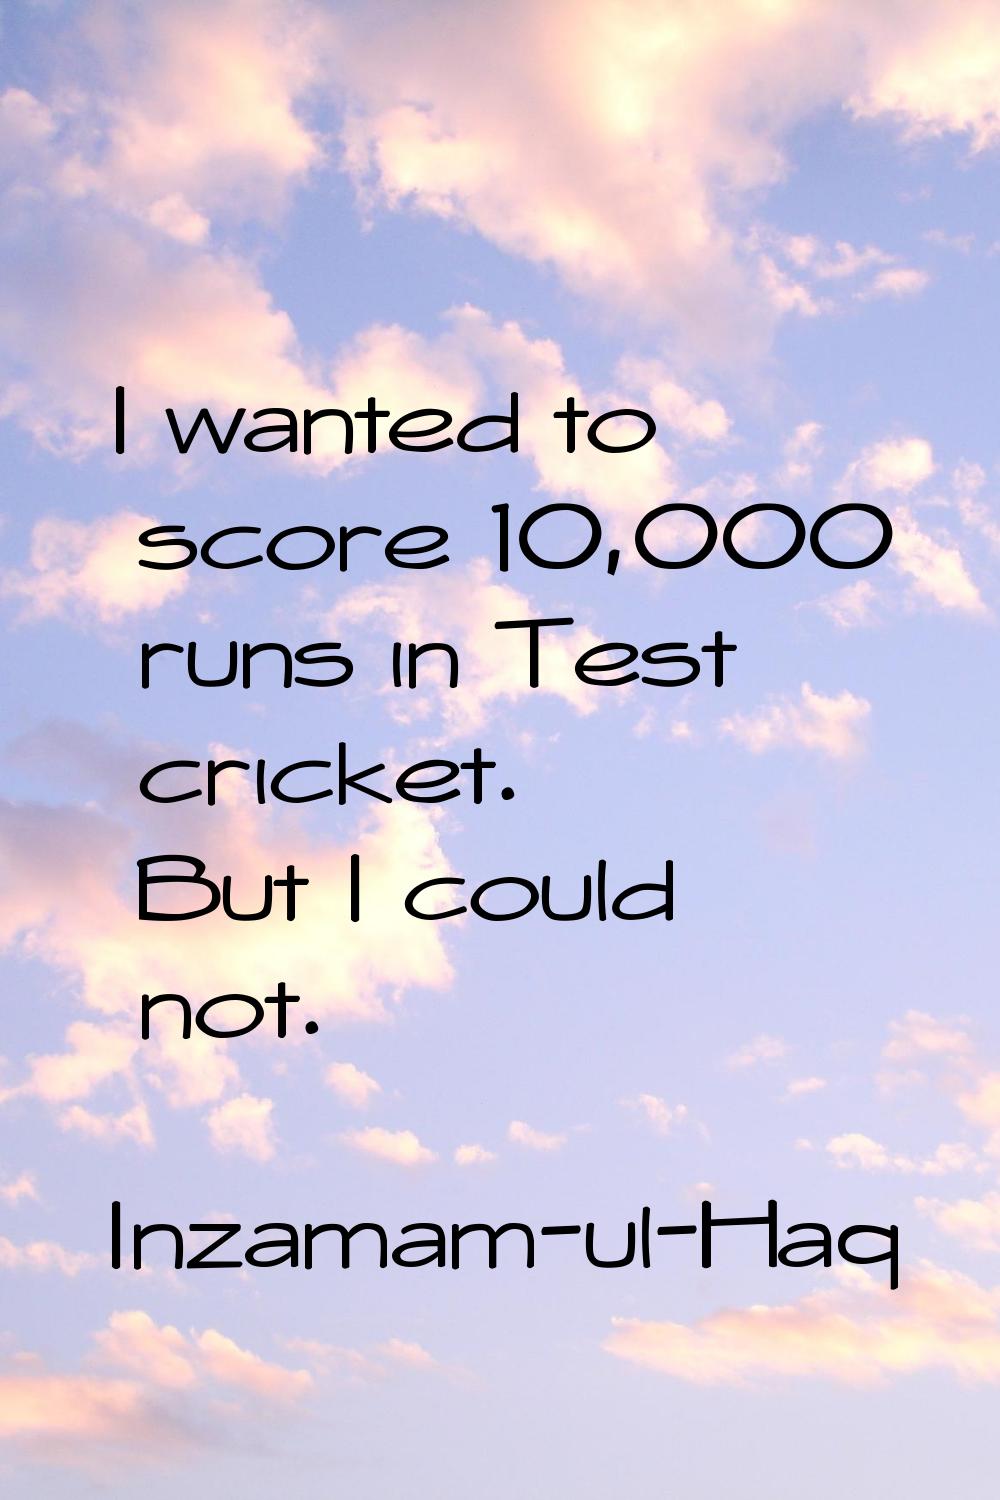 I wanted to score 10,000 runs in Test cricket. But I could not.